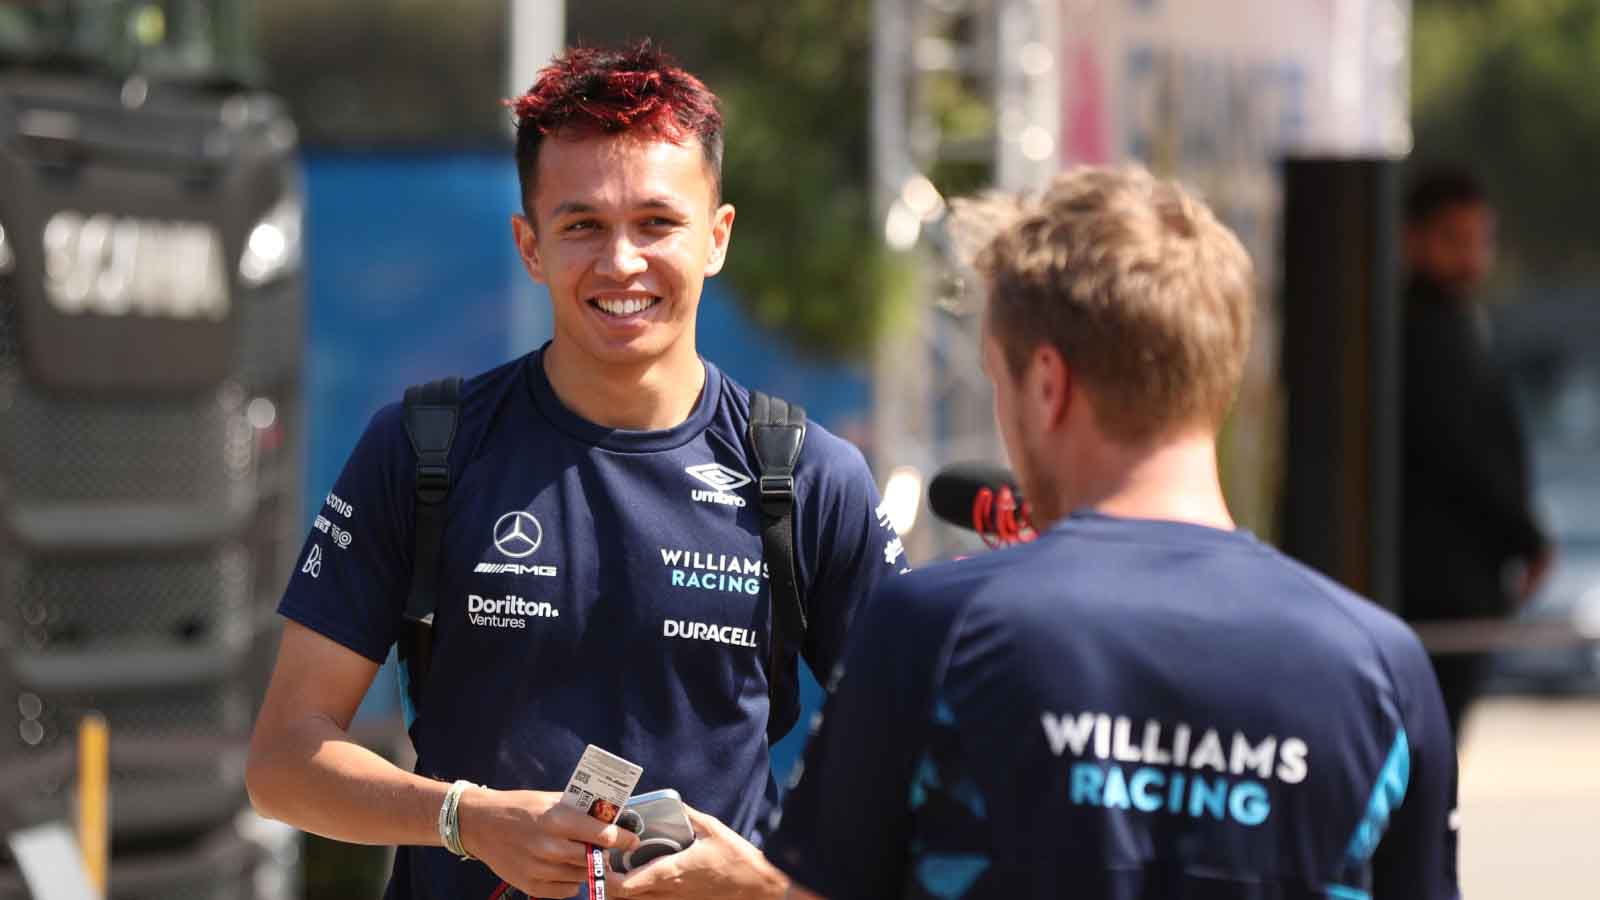 Williams driver Alex Albon arrives in the paddock. France July 2022.